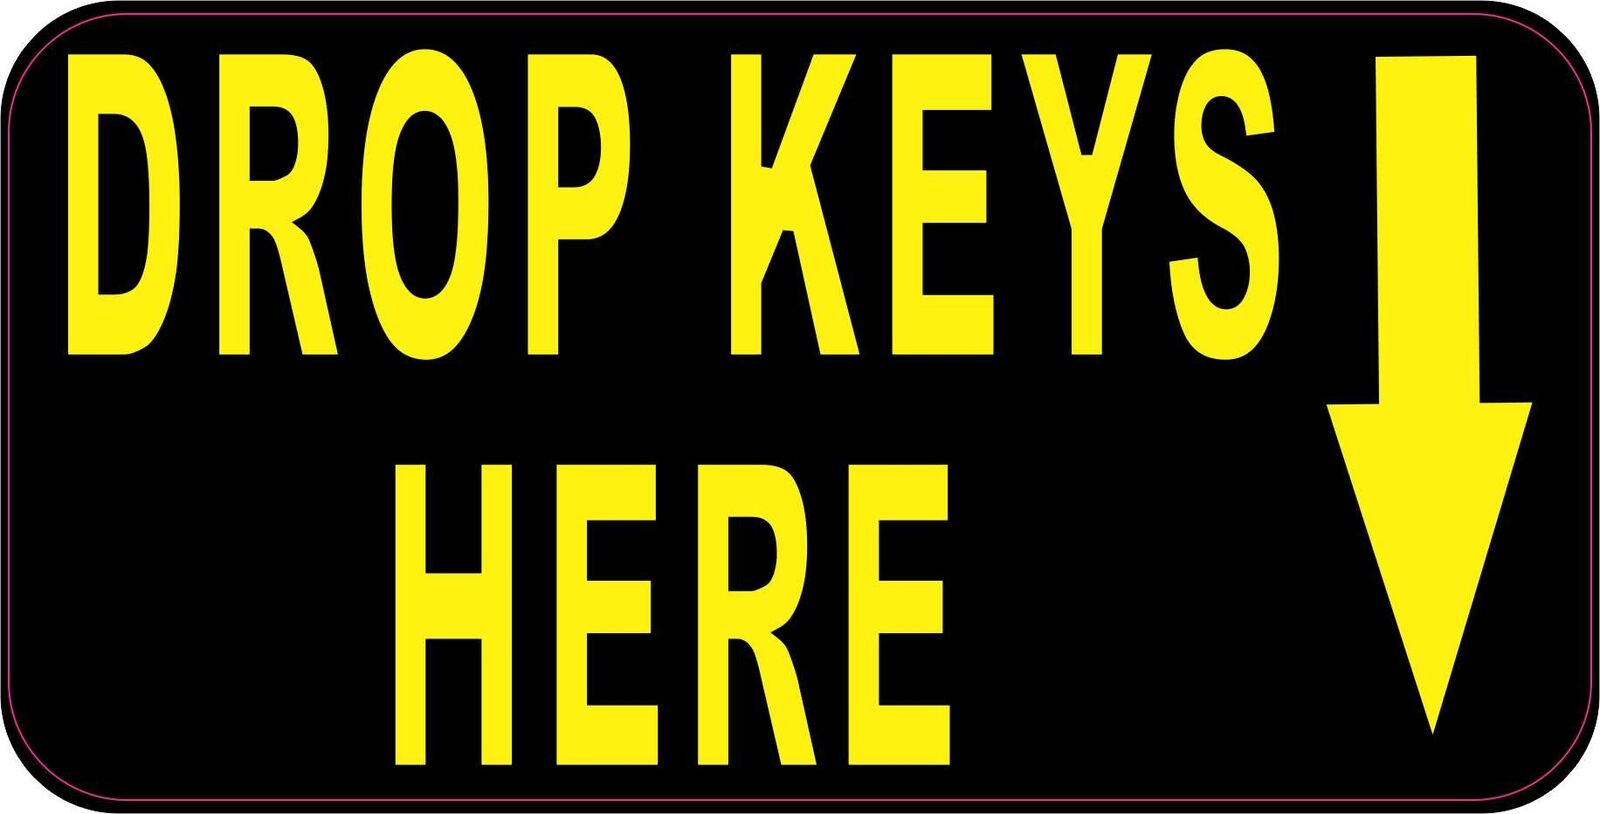 6in x 3in Yellow and Black Drop Keys Here Vinyl Sticker Business Sign Decal